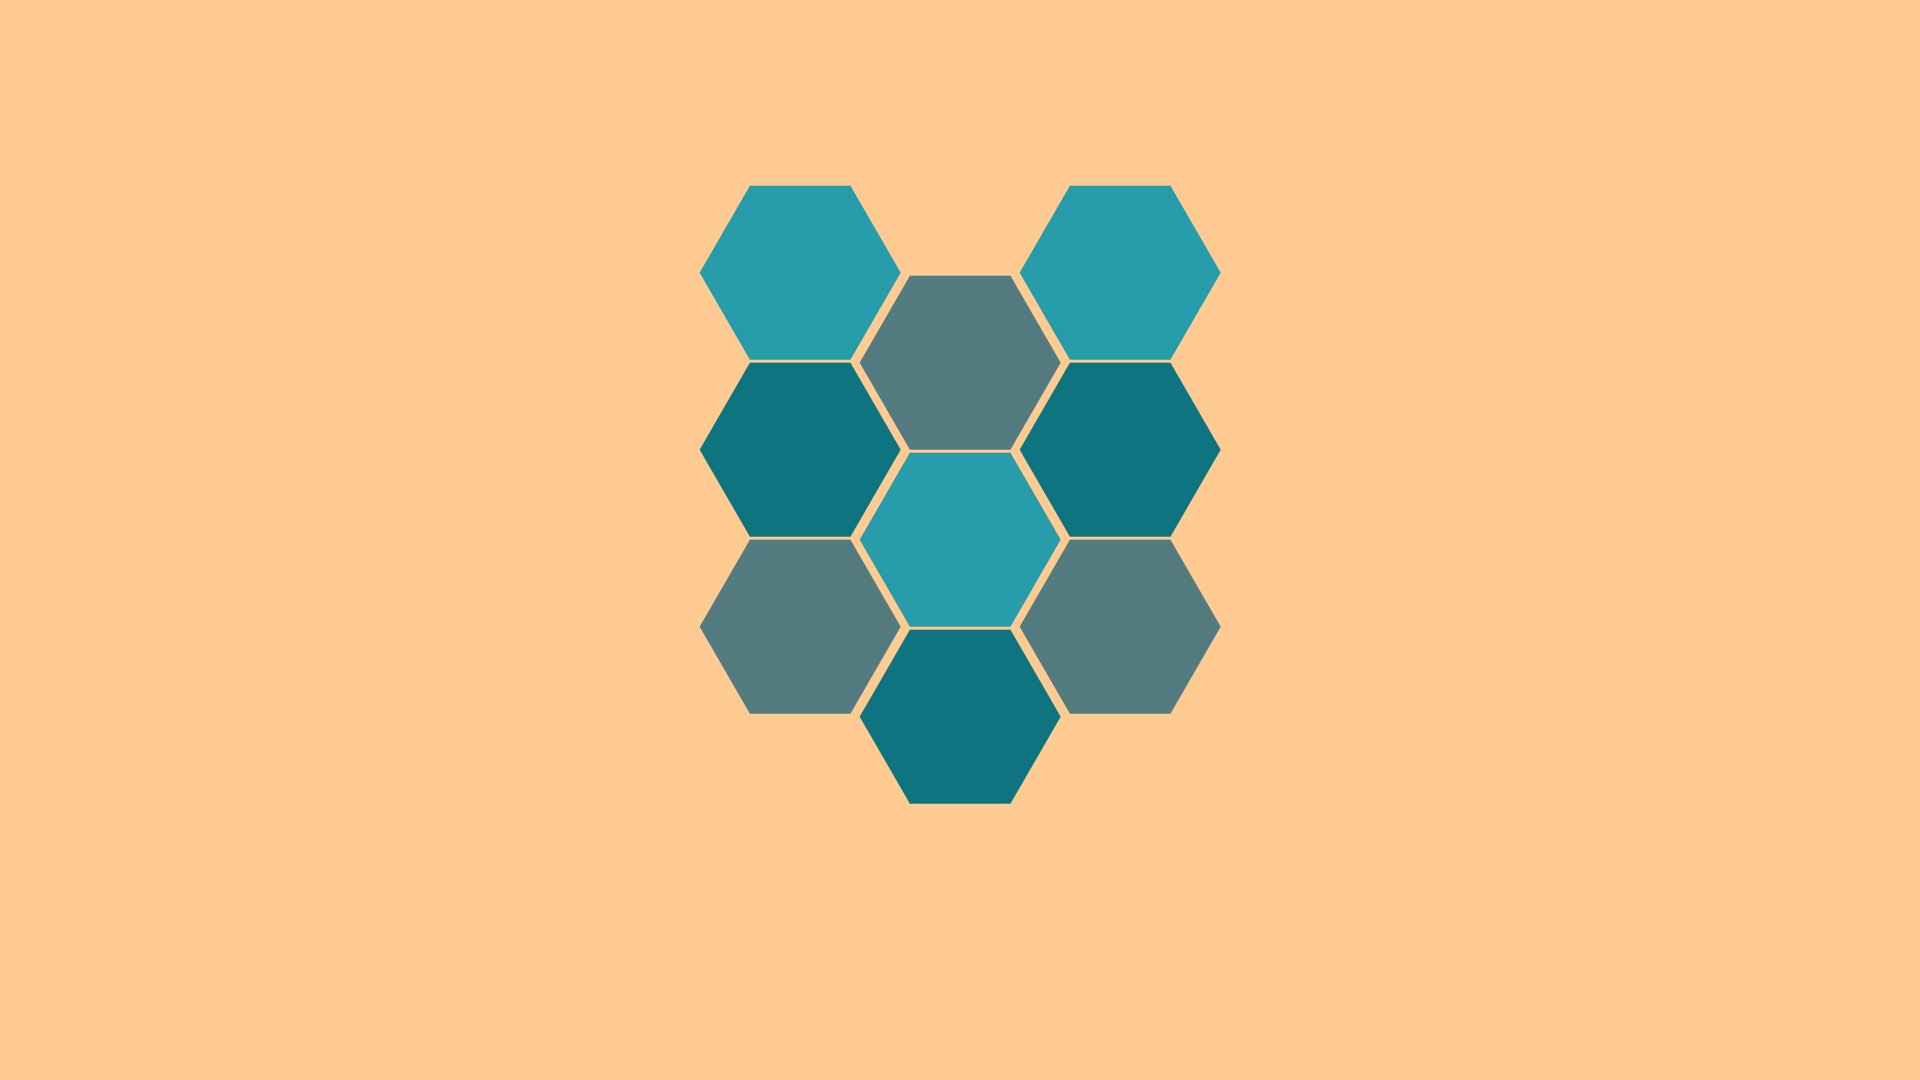 Hexagon Material Style Minimalism Wallpapers Hd Desktop And Mobile